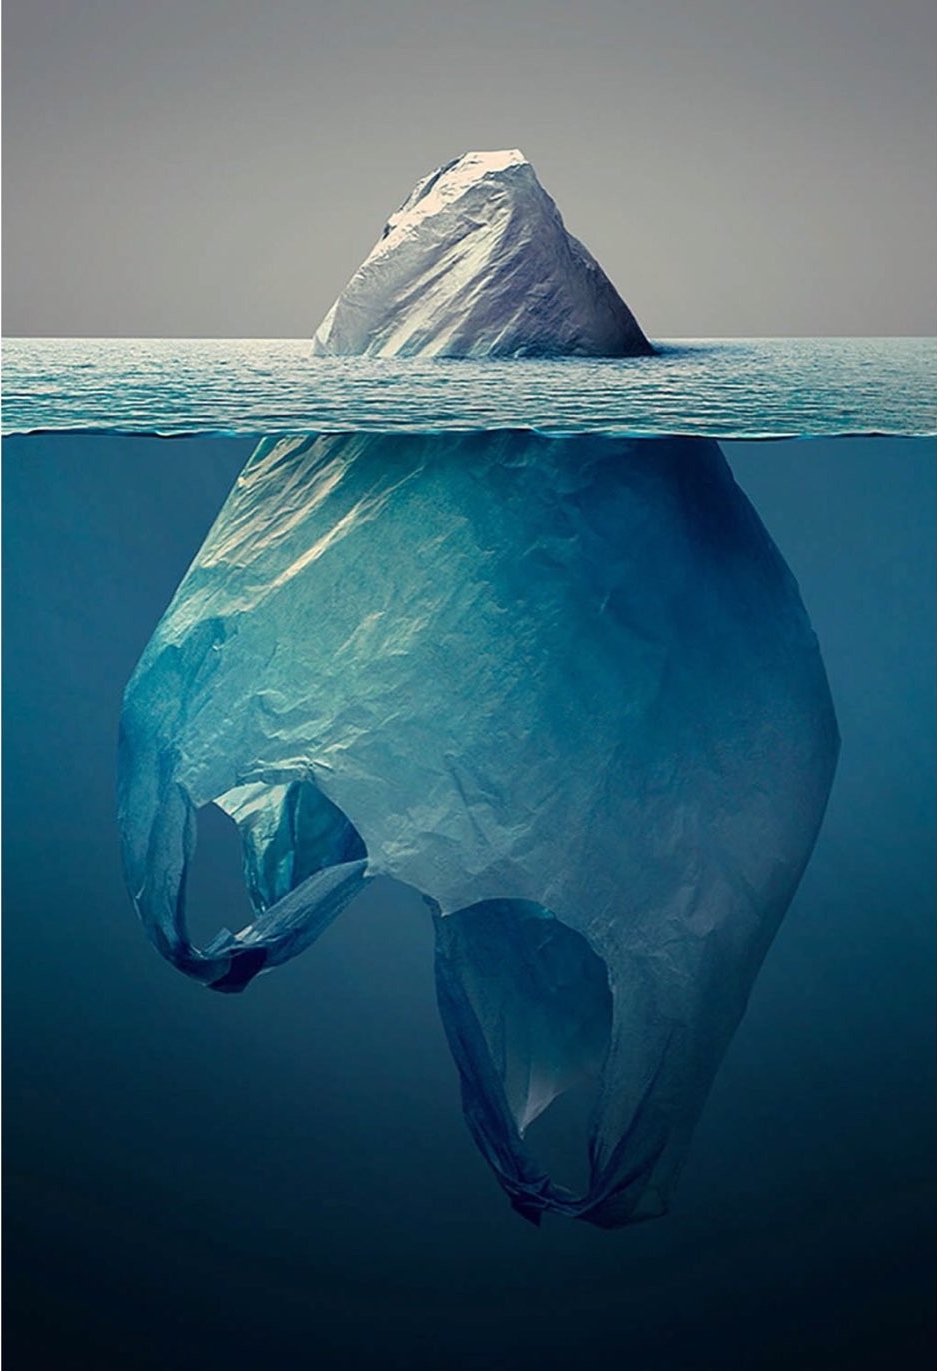 The problem is deeper than you think -- plastic bags.